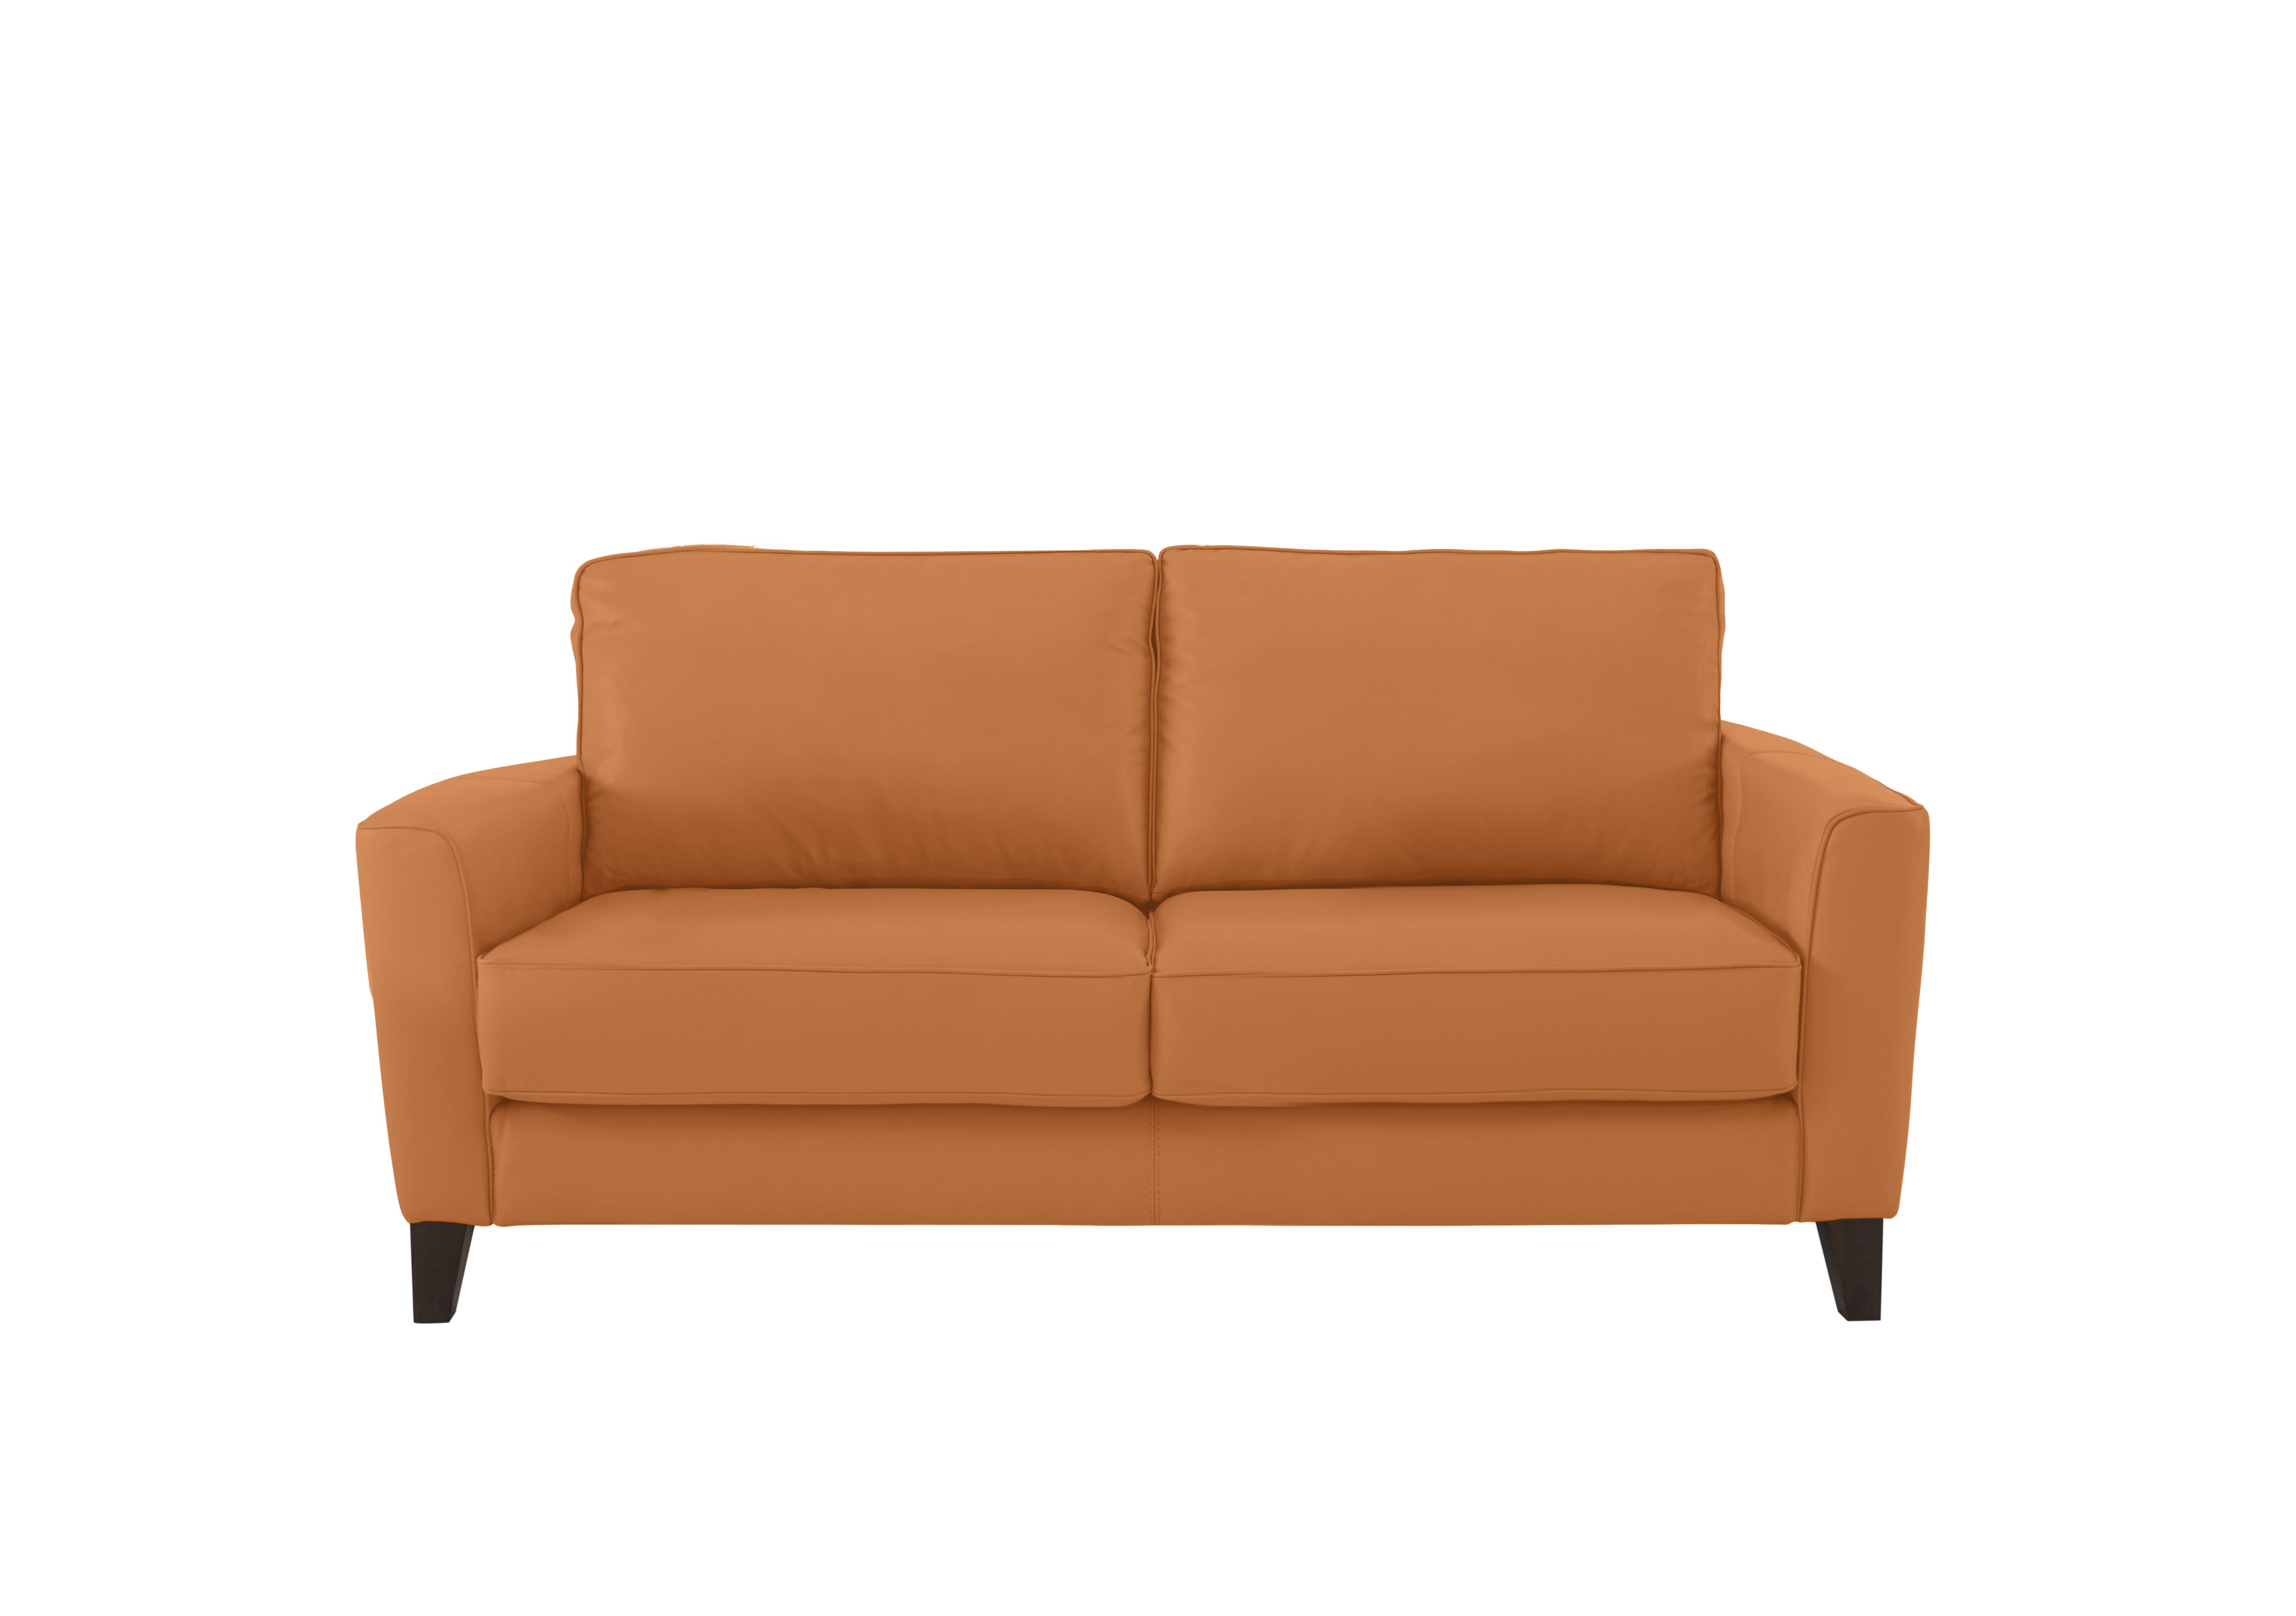 Brondby 2 Seater Leather Sofa in Bv-335e Honey Yellow on Furniture Village